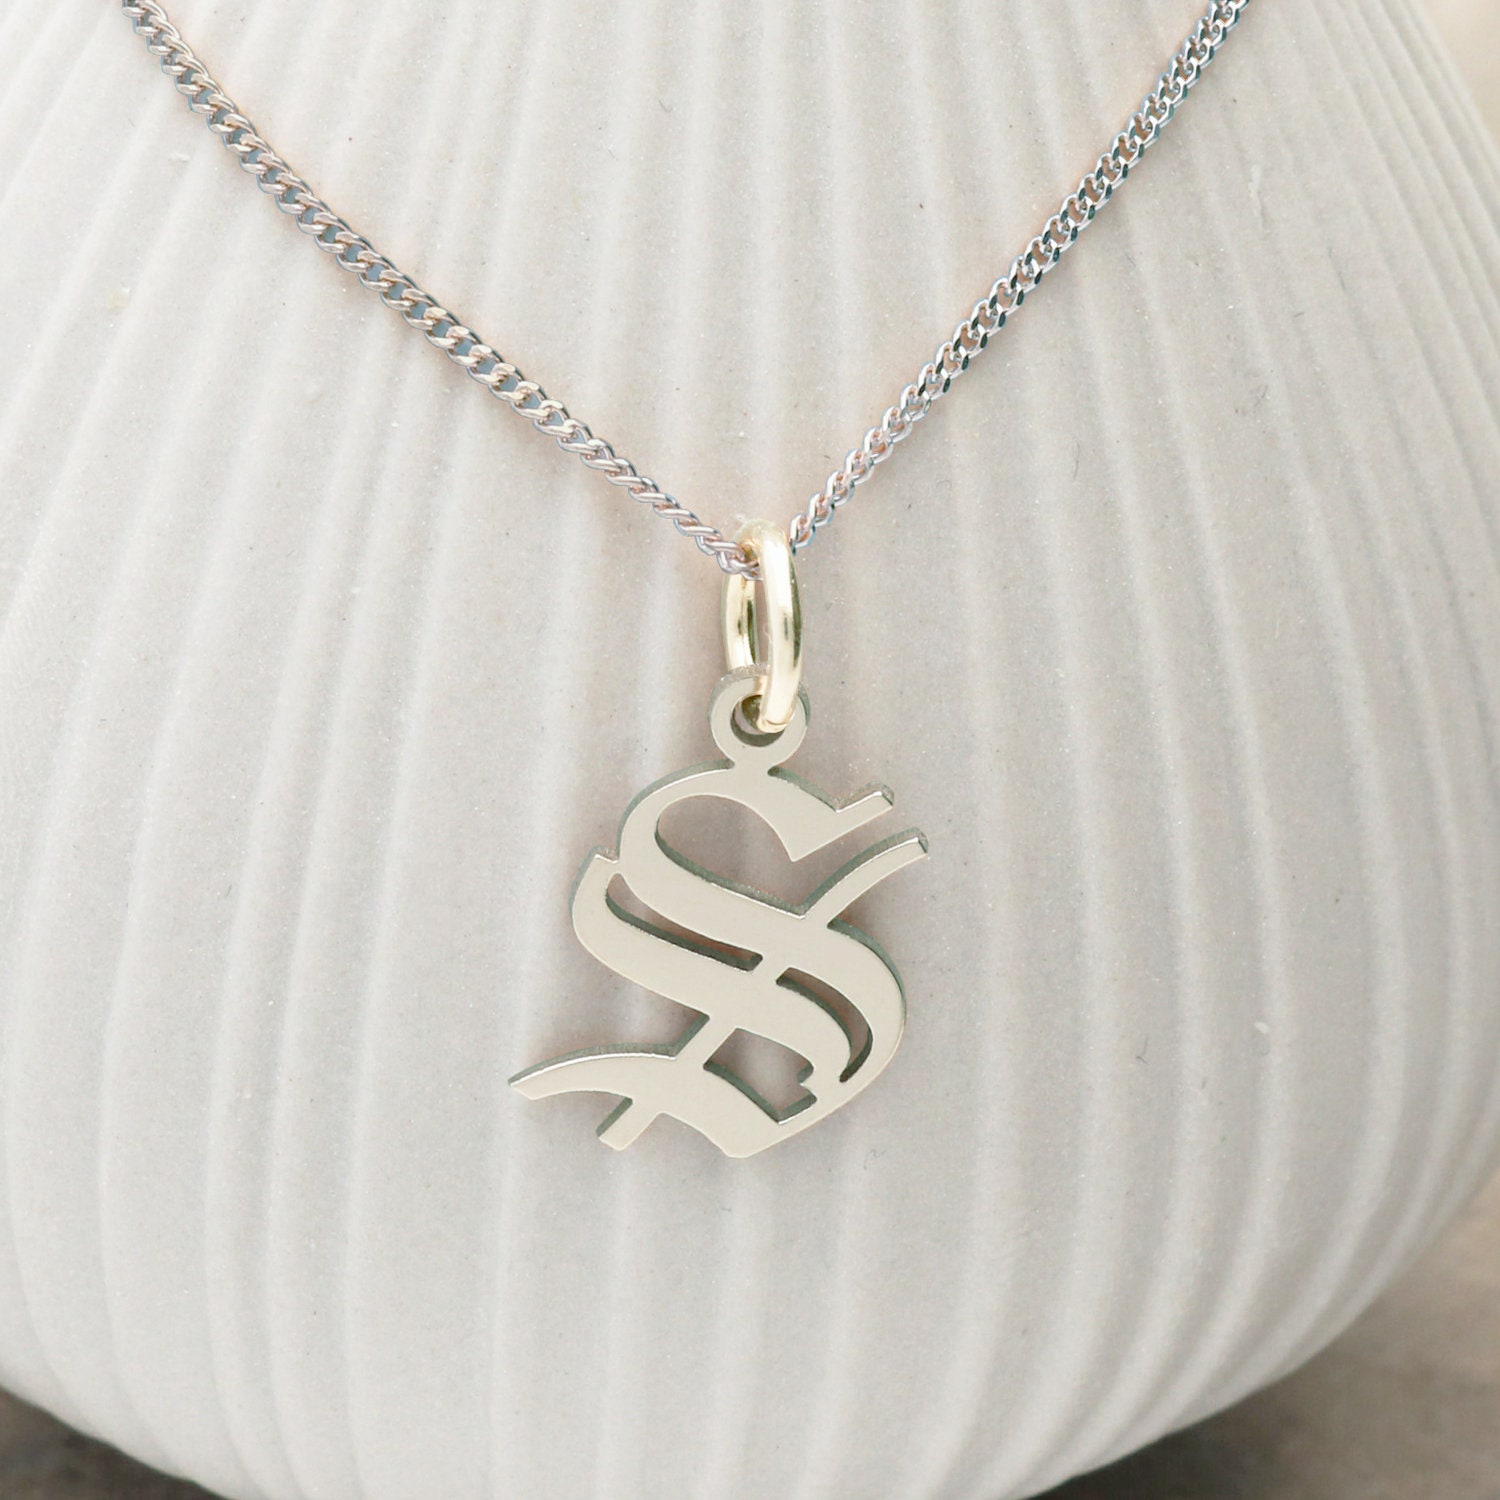 Sterling Silver Old English Gothic Initial Pendant or Necklace 